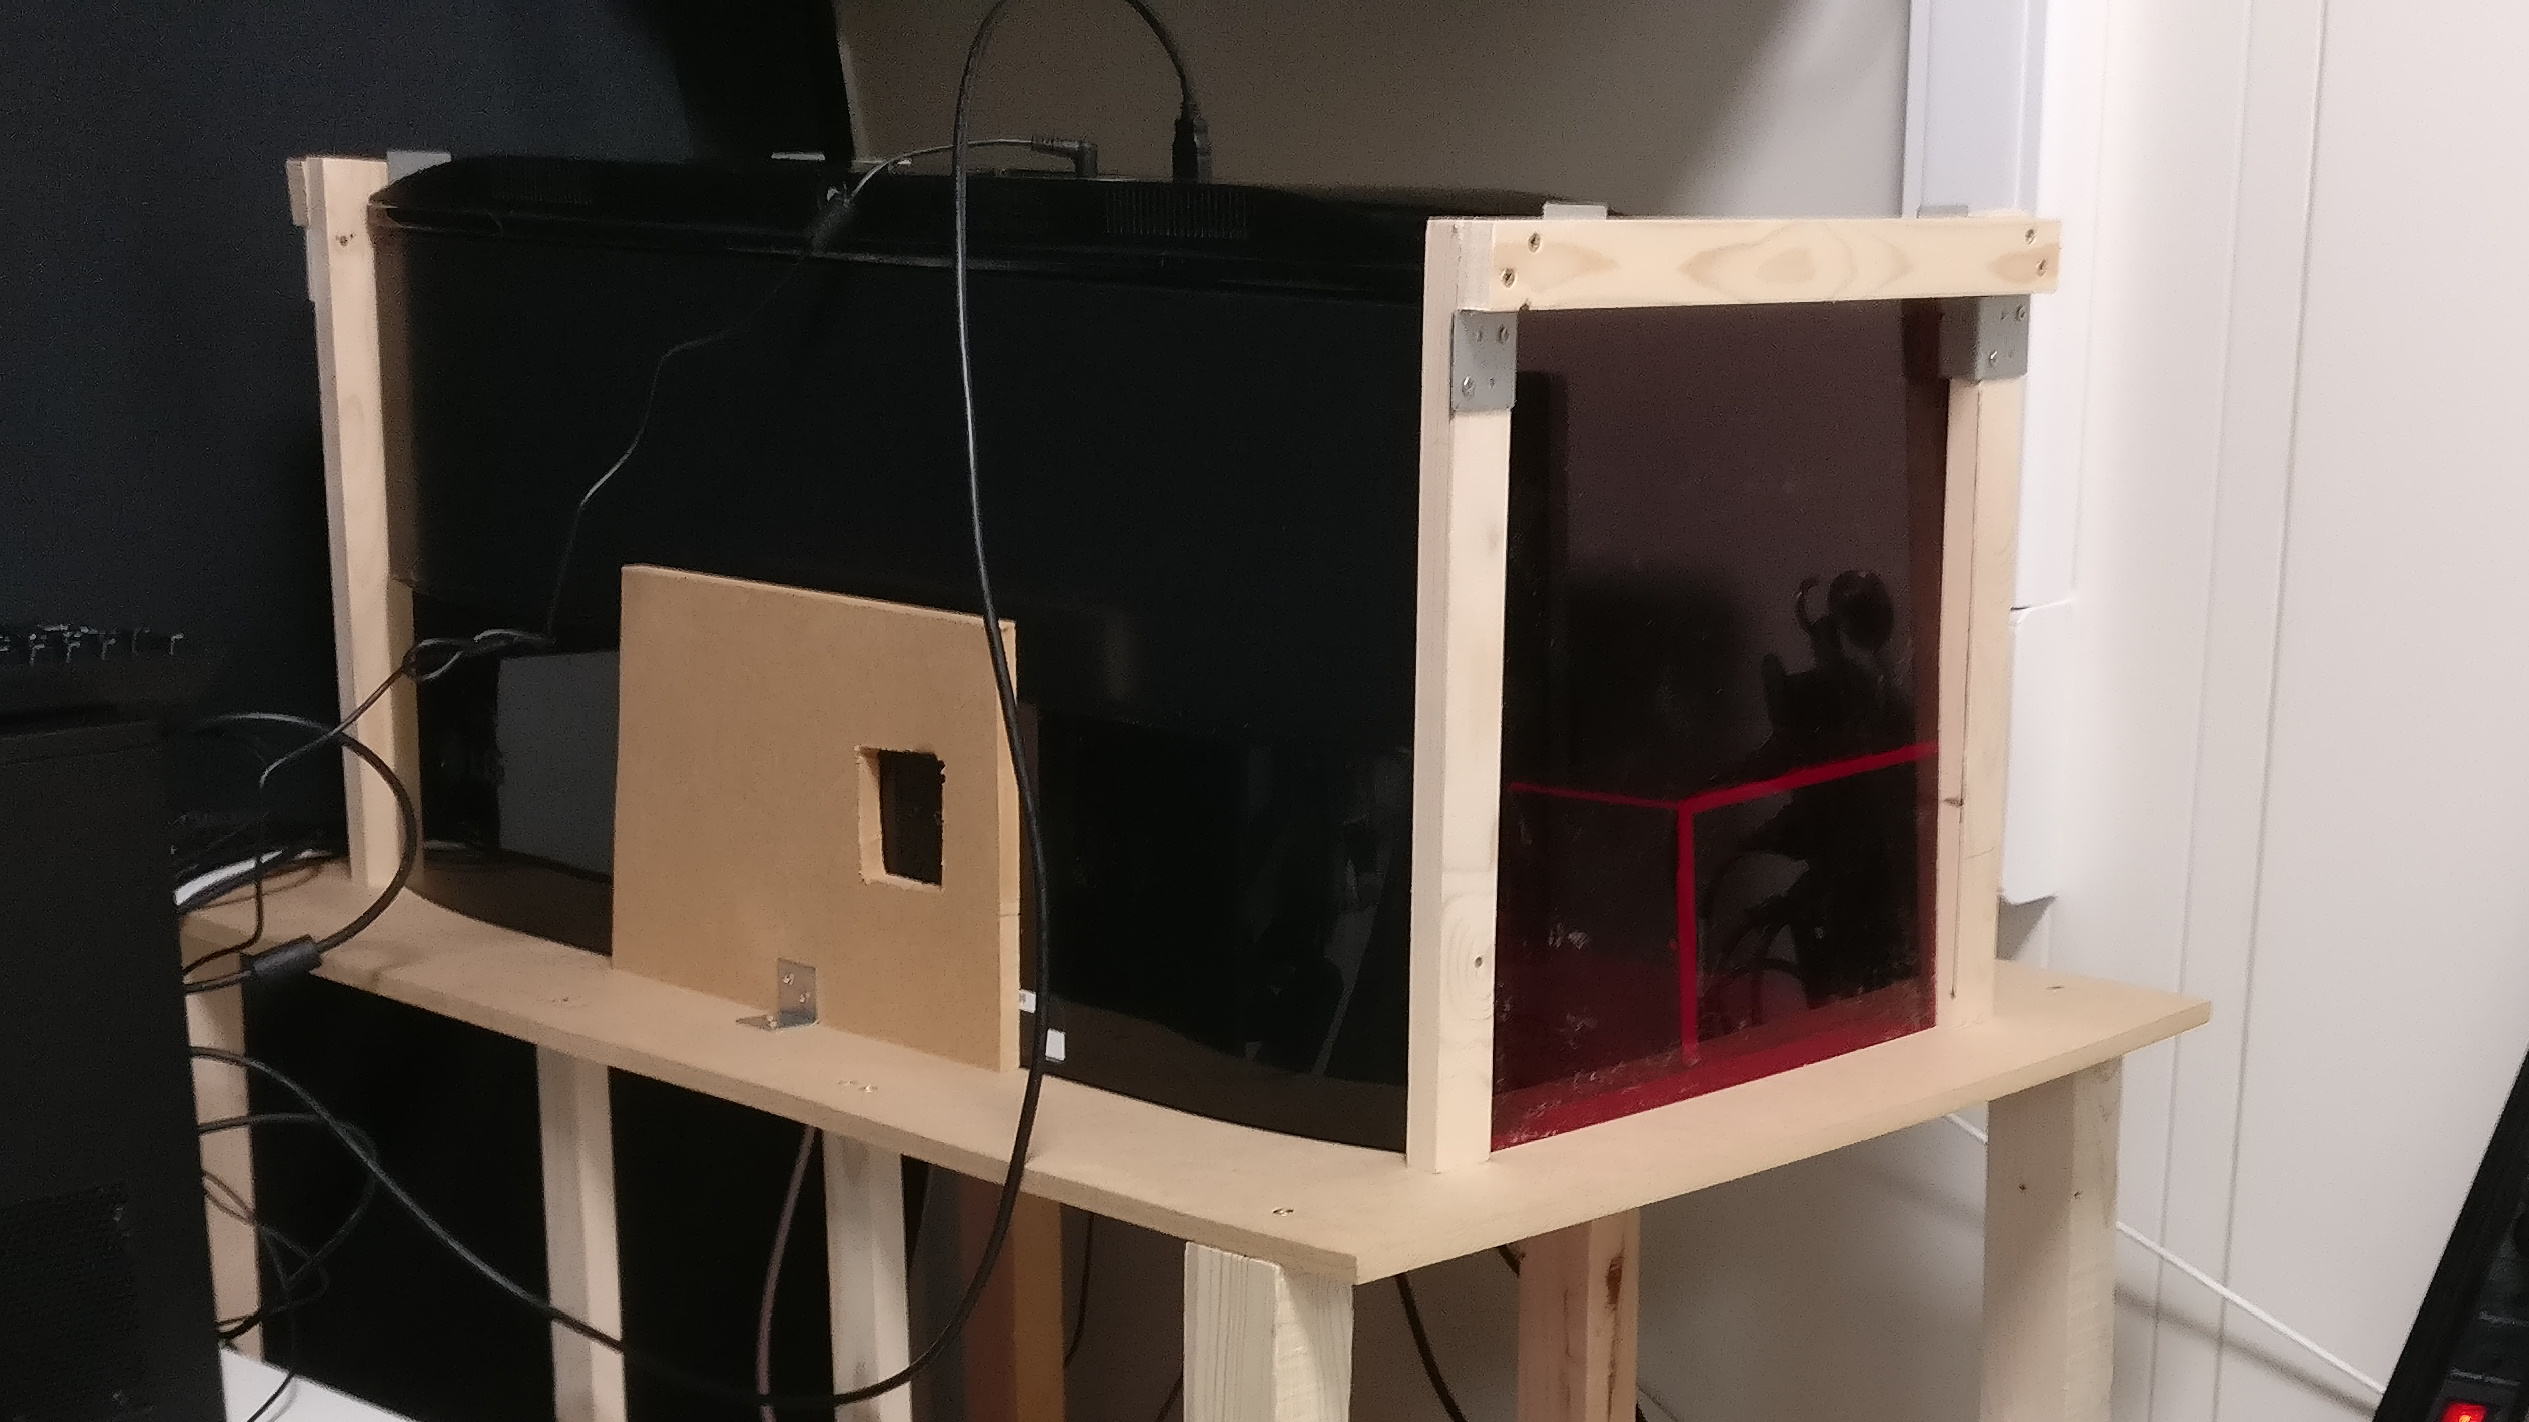 Picture of the experimental setup, showing the enclosed pen with monitors on
three sides.